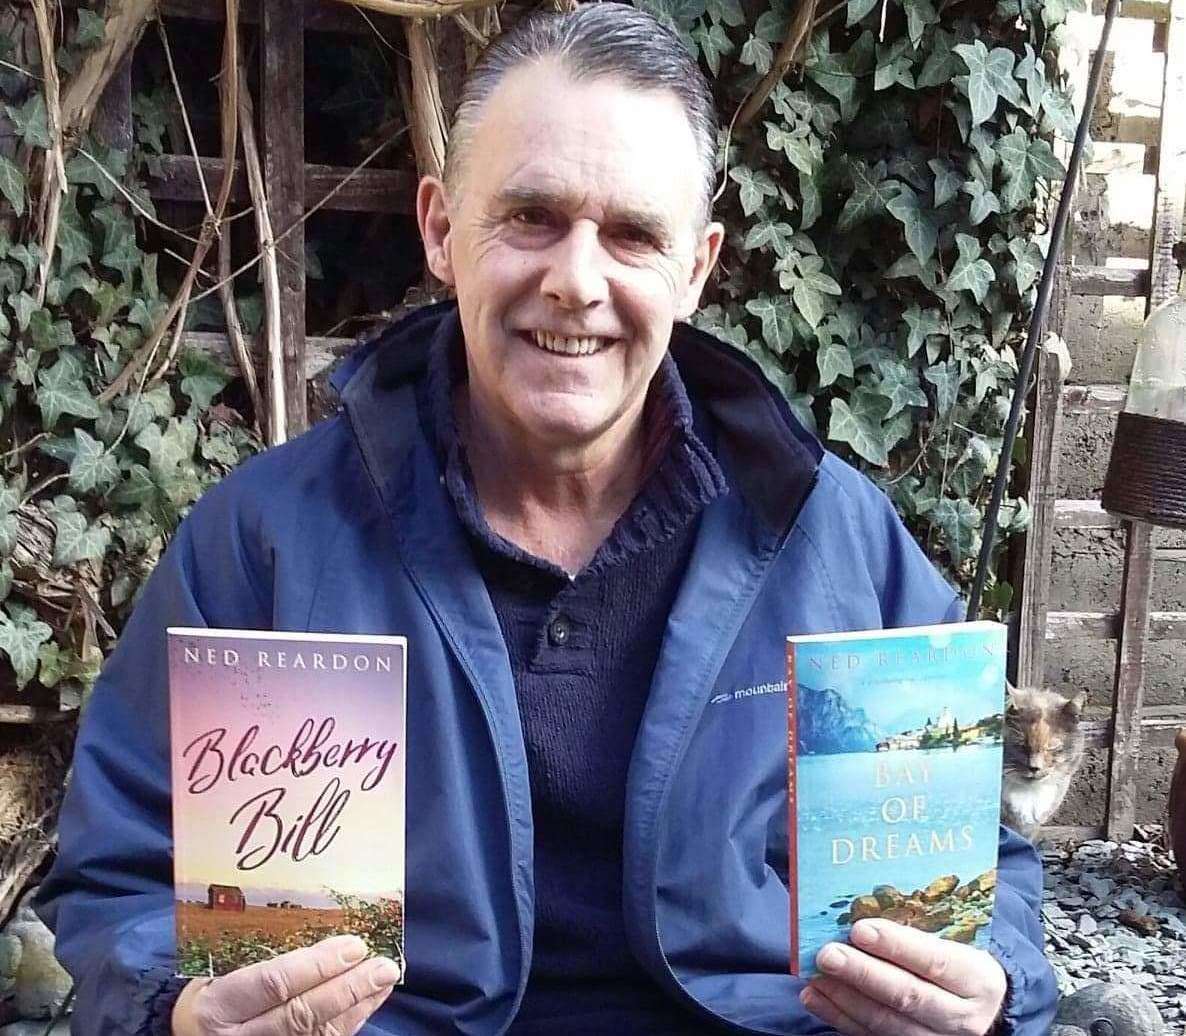 Author Ned Reardon with his new book Bay of Dreams and his first one Blackberry Bill